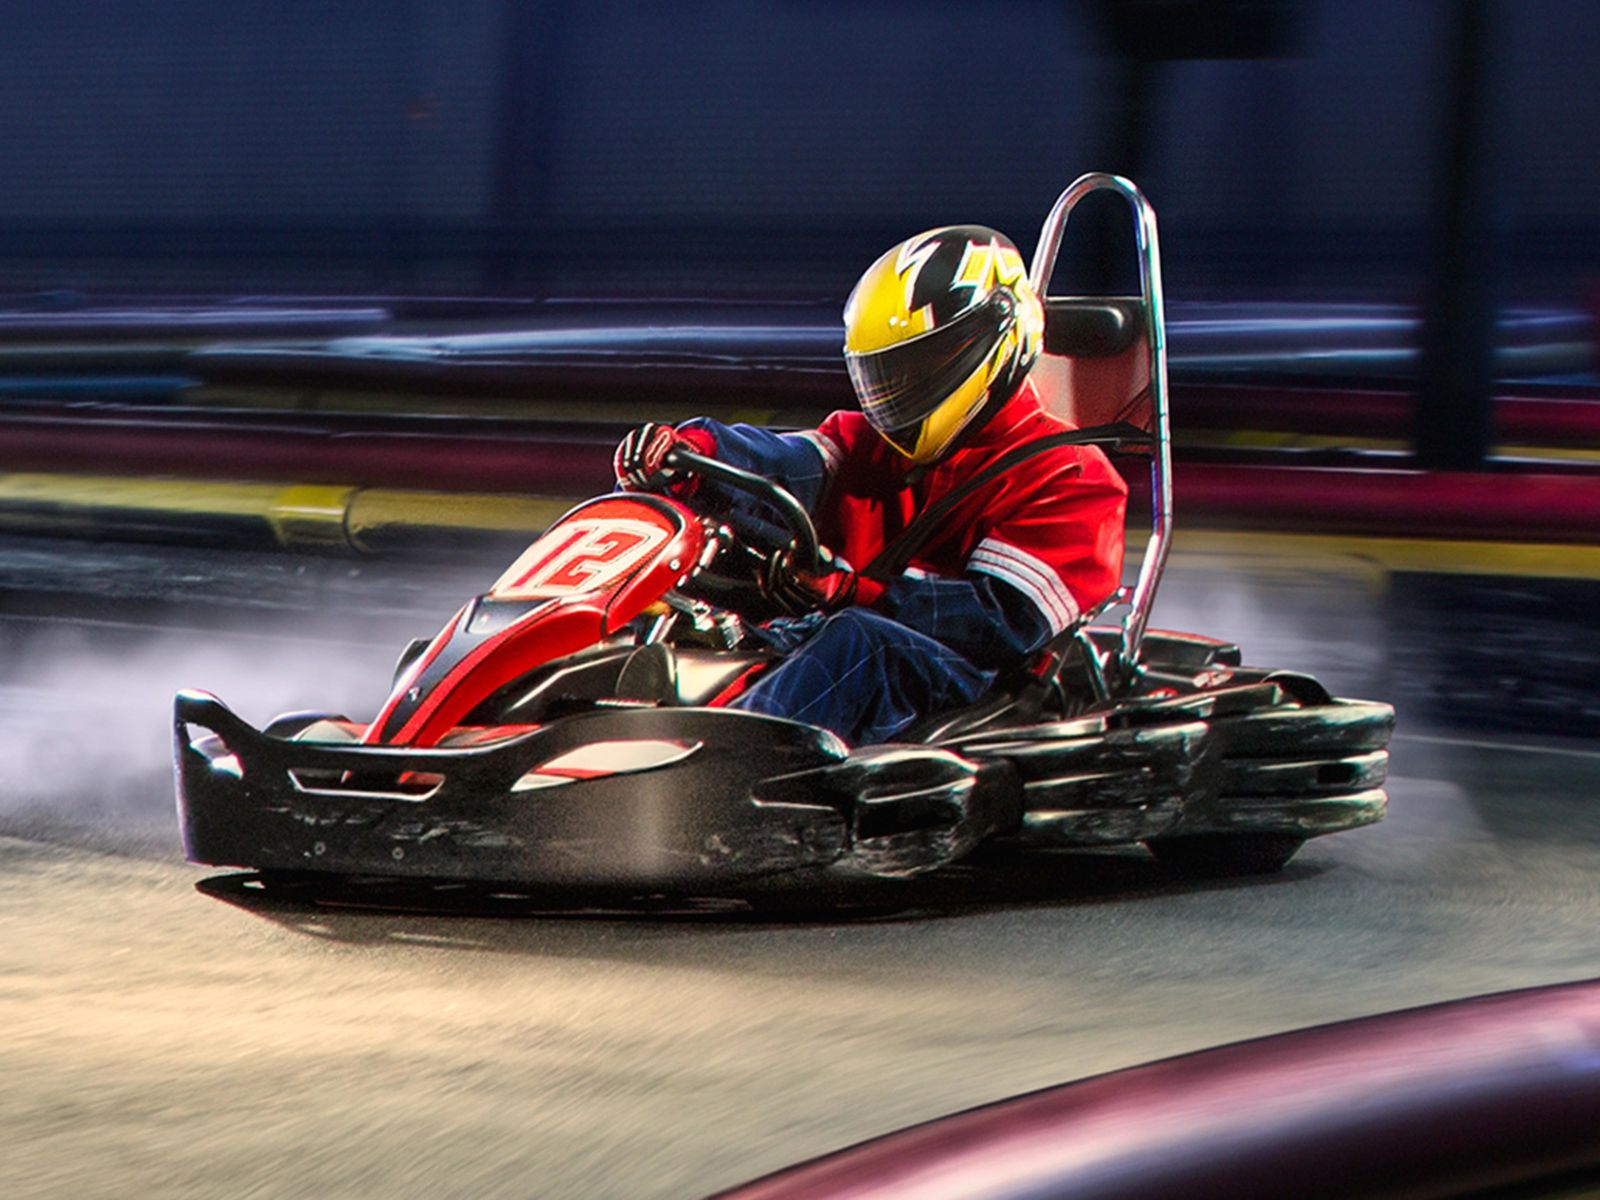 Why go-karts are fun for kids?